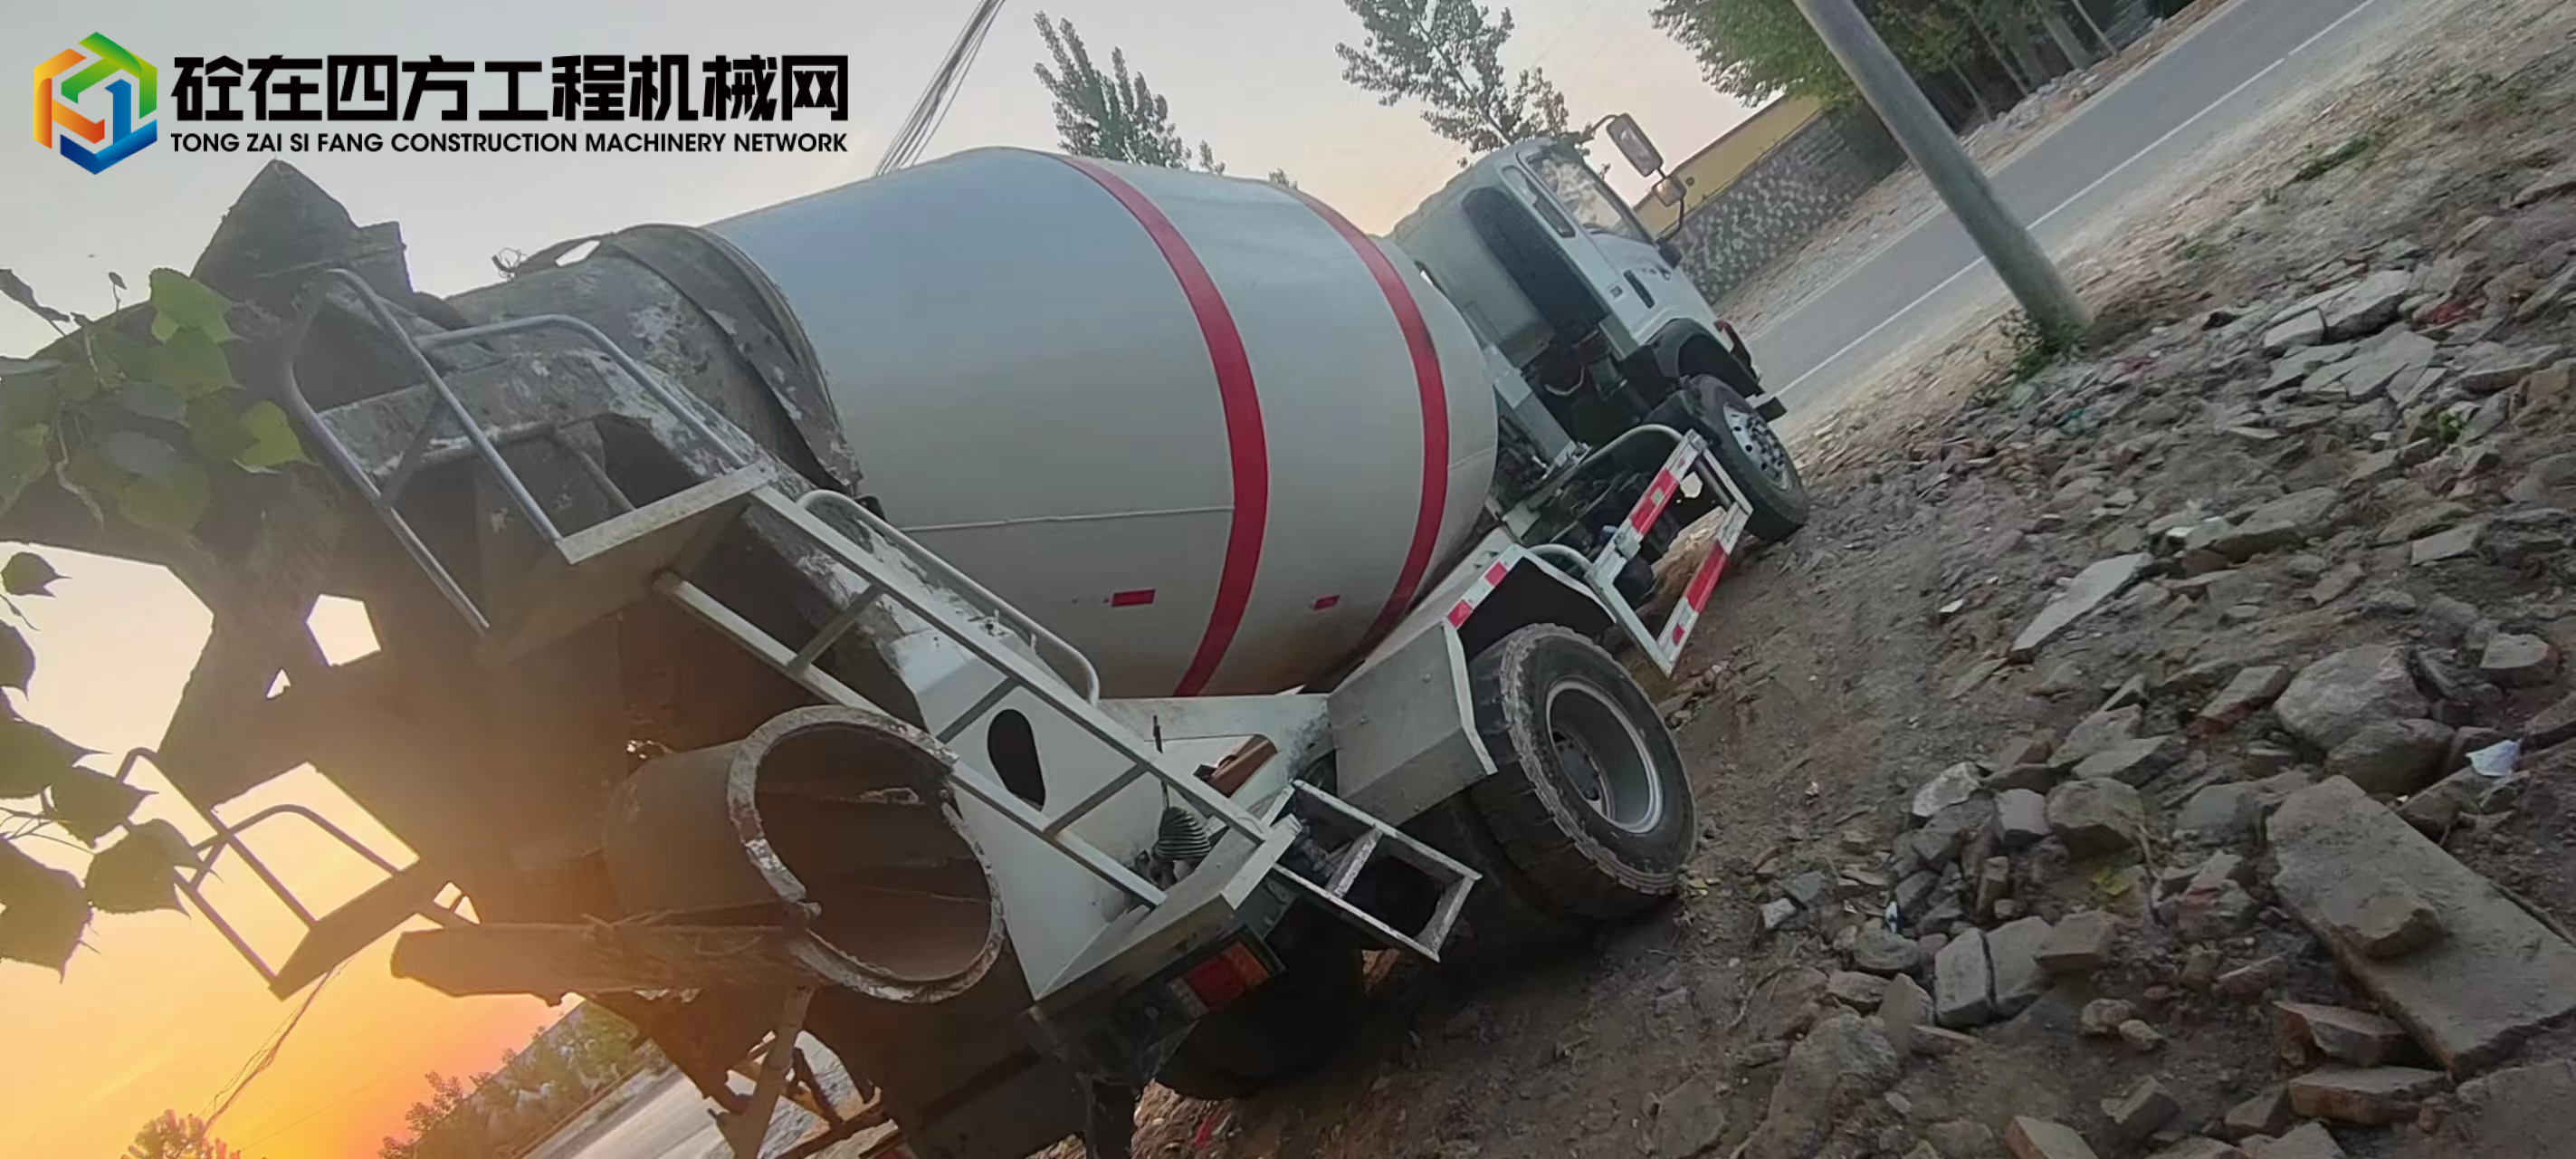 https://images.tongzsf.com/tong/truck_machine/20240510/1663dc2afd788a.jpg